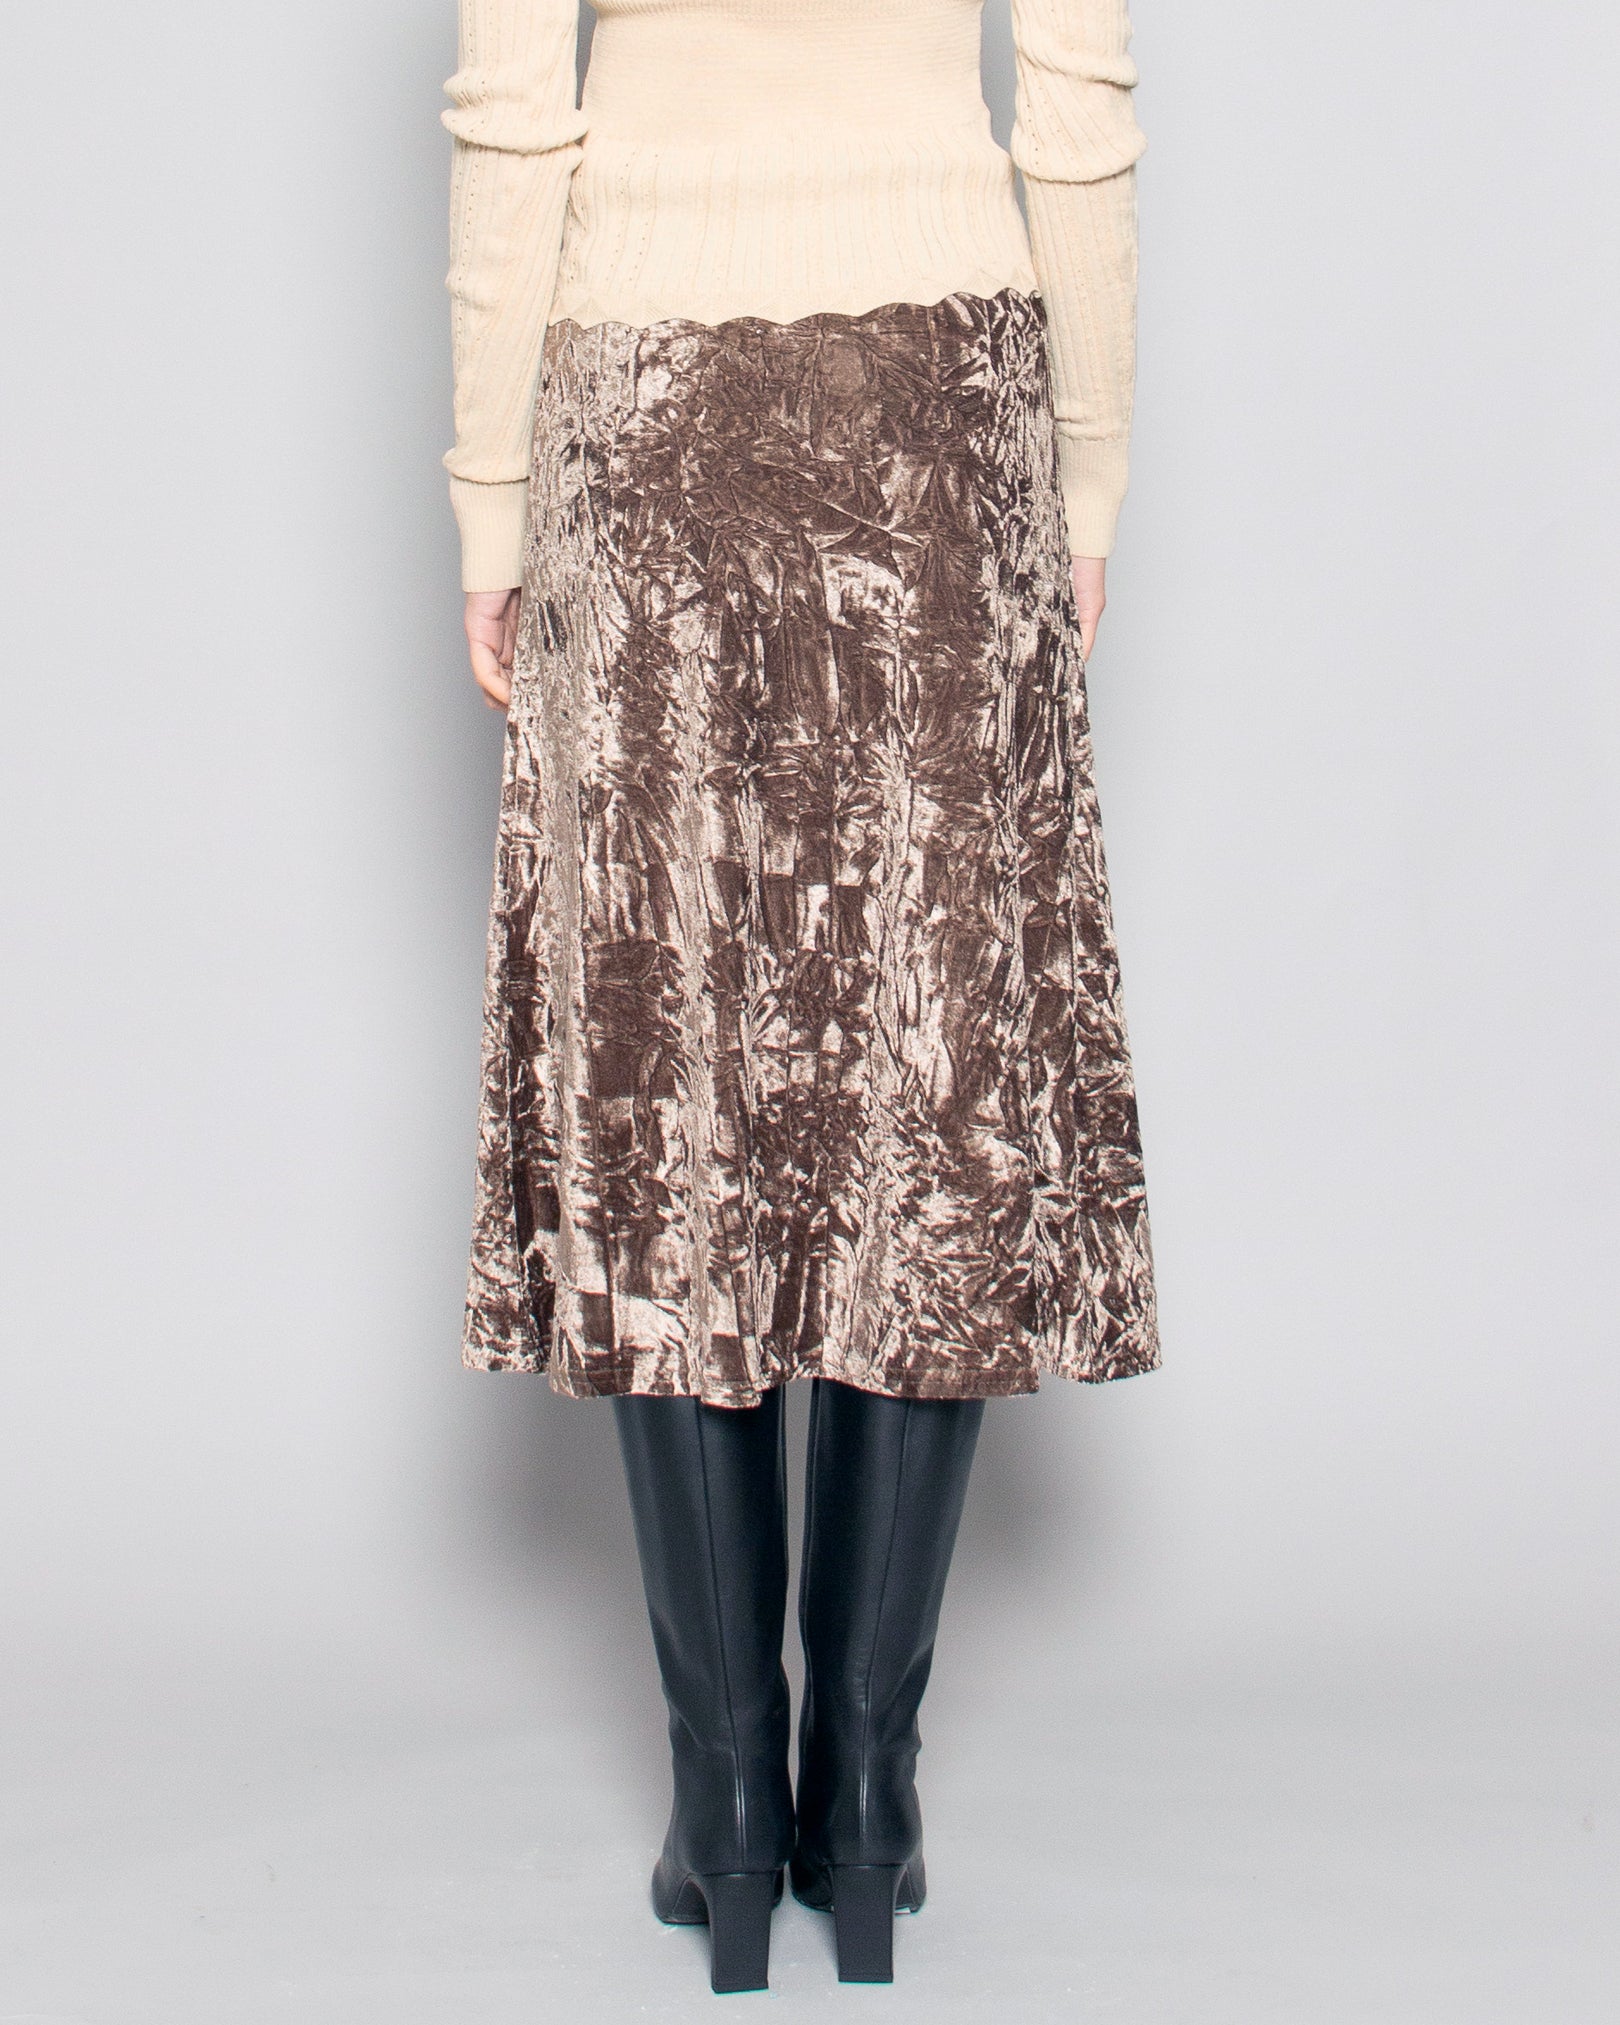 PERSONS Kit Crushed Velvet Midi Skirt in Cocoa available at Lahn.shop